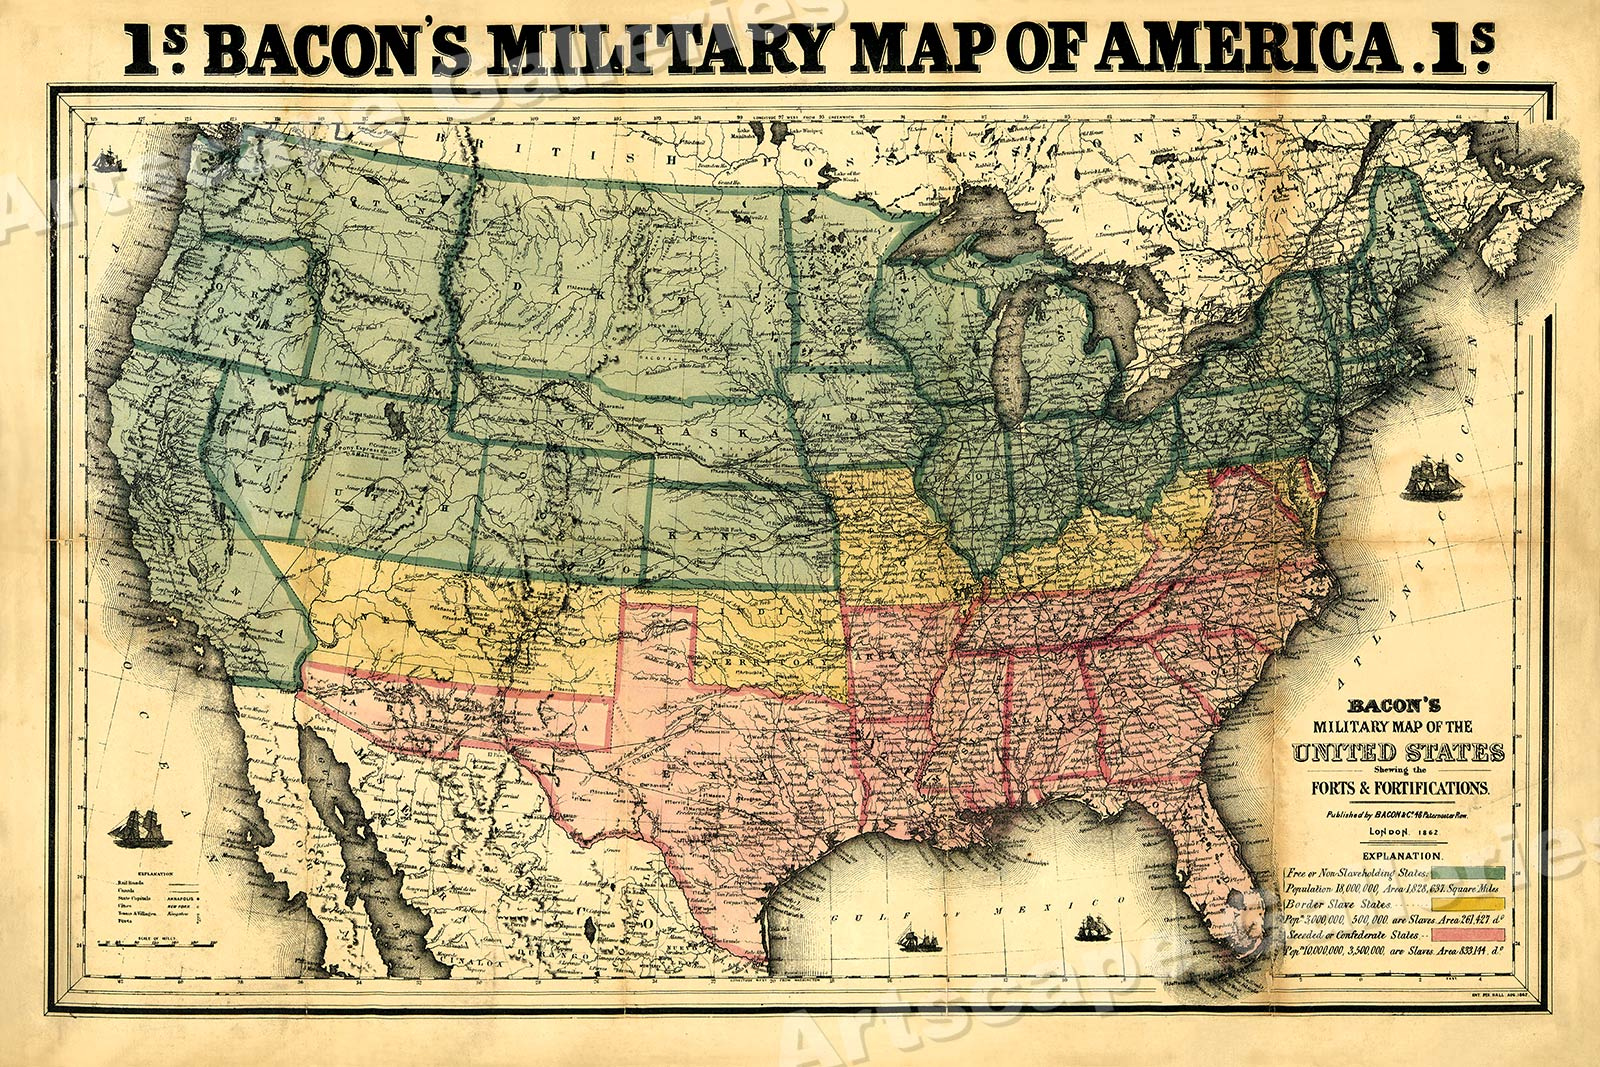 1862 Bacons Military Map Of America Civil War Wall Map Poster 24x36 